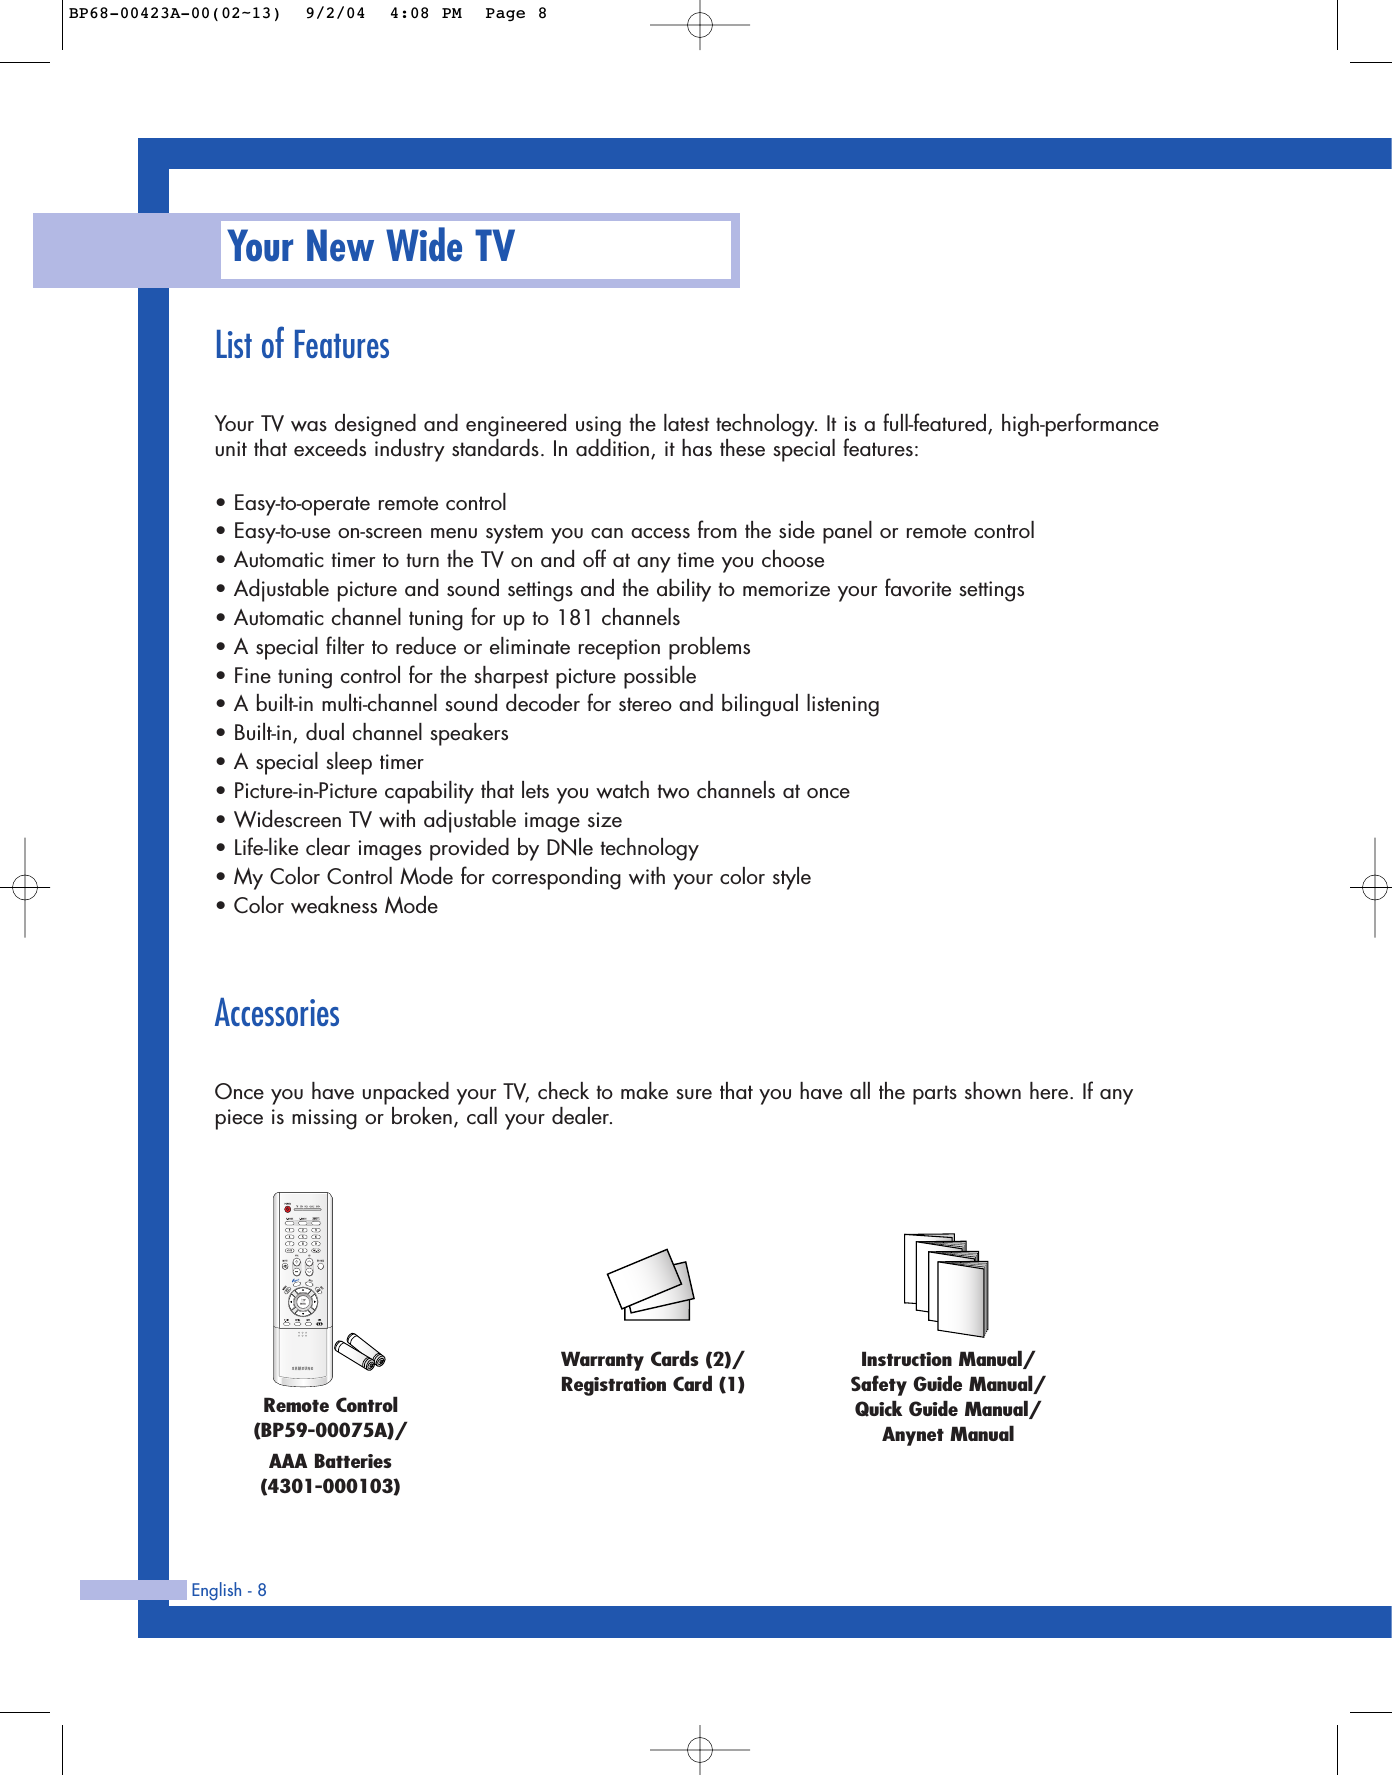 English - 8List of FeaturesYour TV was designed and engineered using the latest technology. It is a full-featured, high-performanceunit that exceeds industry standards. In addition, it has these special features:• Easy-to-operate remote control• Easy-to-use on-screen menu system you can access from the side panel or remote control• Automatic timer to turn the TV on and off at any time you choose• Adjustable picture and sound settings and the ability to memorize your favorite settings• Automatic channel tuning for up to 181 channels• A special filter to reduce or eliminate reception problems• Fine tuning control for the sharpest picture possible• A built-in multi-channel sound decoder for stereo and bilingual listening• Built-in, dual channel speakers• A special sleep timer• Picture-in-Picture capability that lets you watch two channels at once• Widescreen TV with adjustable image size• Life-like clear images provided by DNle technology• My Color Control Mode for corresponding with your color style• Color weakness ModeAccessoriesOnce you have unpacked your TV, check to make sure that you have all the parts shown here. If anypiece is missing or broken, call your dealer. Your New Wide TVRemote Control(BP59-00075A)/AAA Batteries(4301-000103)Instruction Manual/Safety Guide Manual/Quick Guide Manual/Anynet ManualWarranty Cards (2)/Registration Card (1)BP68-00423A-00(02~13)  9/2/04  4:08 PM  Page 8